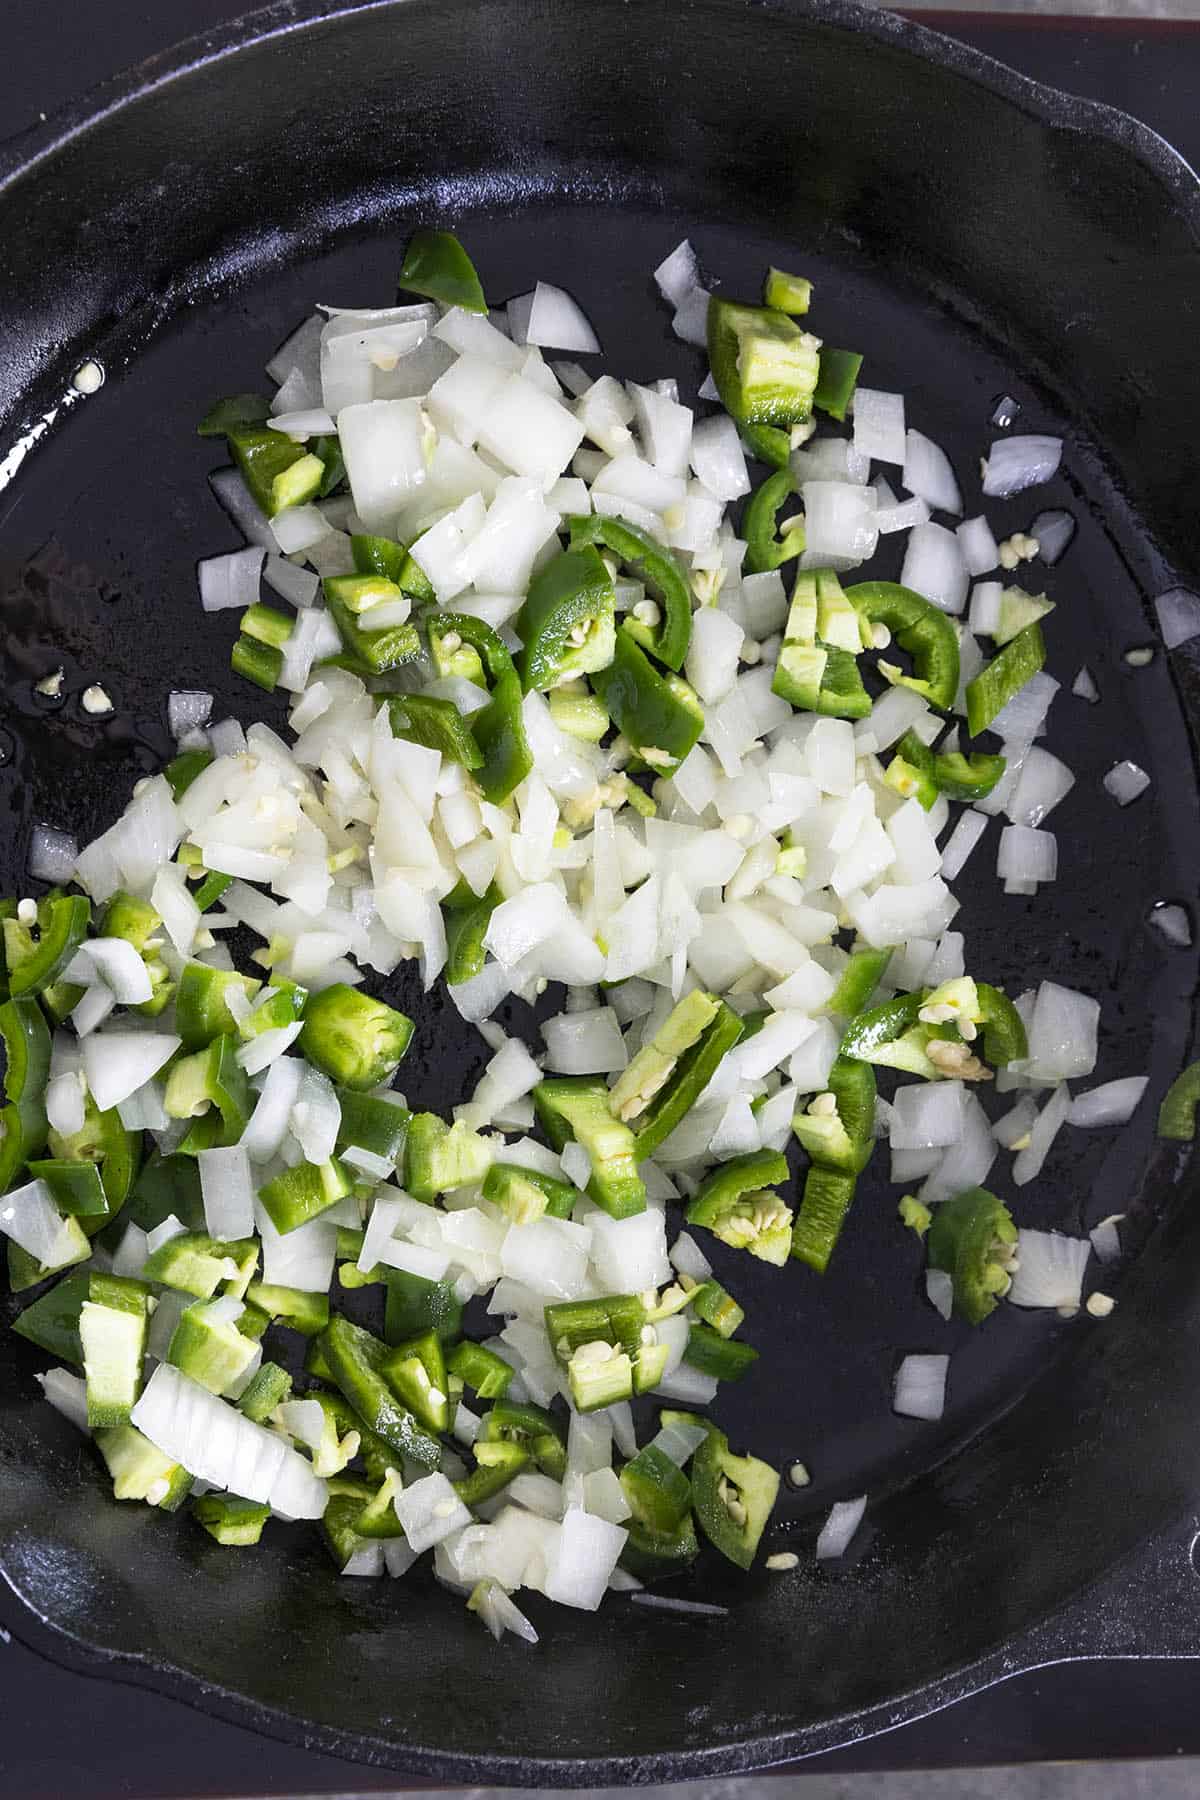 Cooking peppers and onions in a hot pan